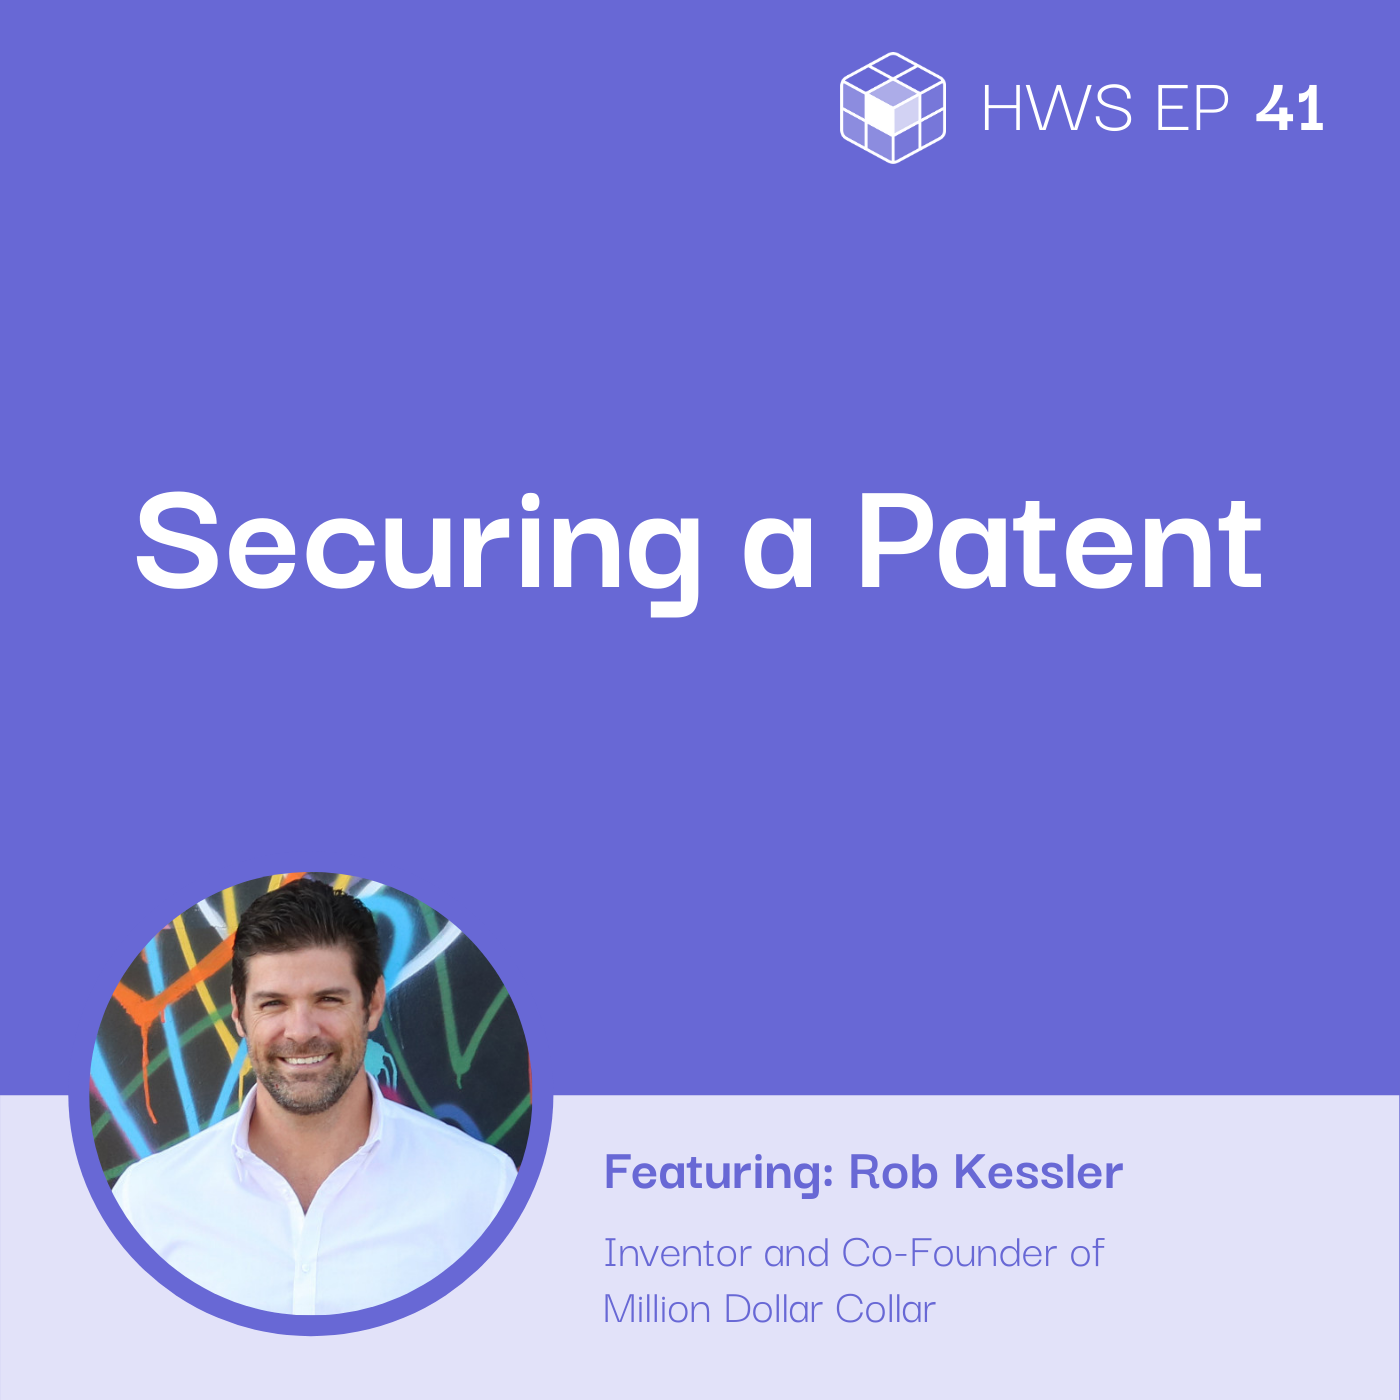 Rob Kessler on becoming an inventor and securing a patent for your invention